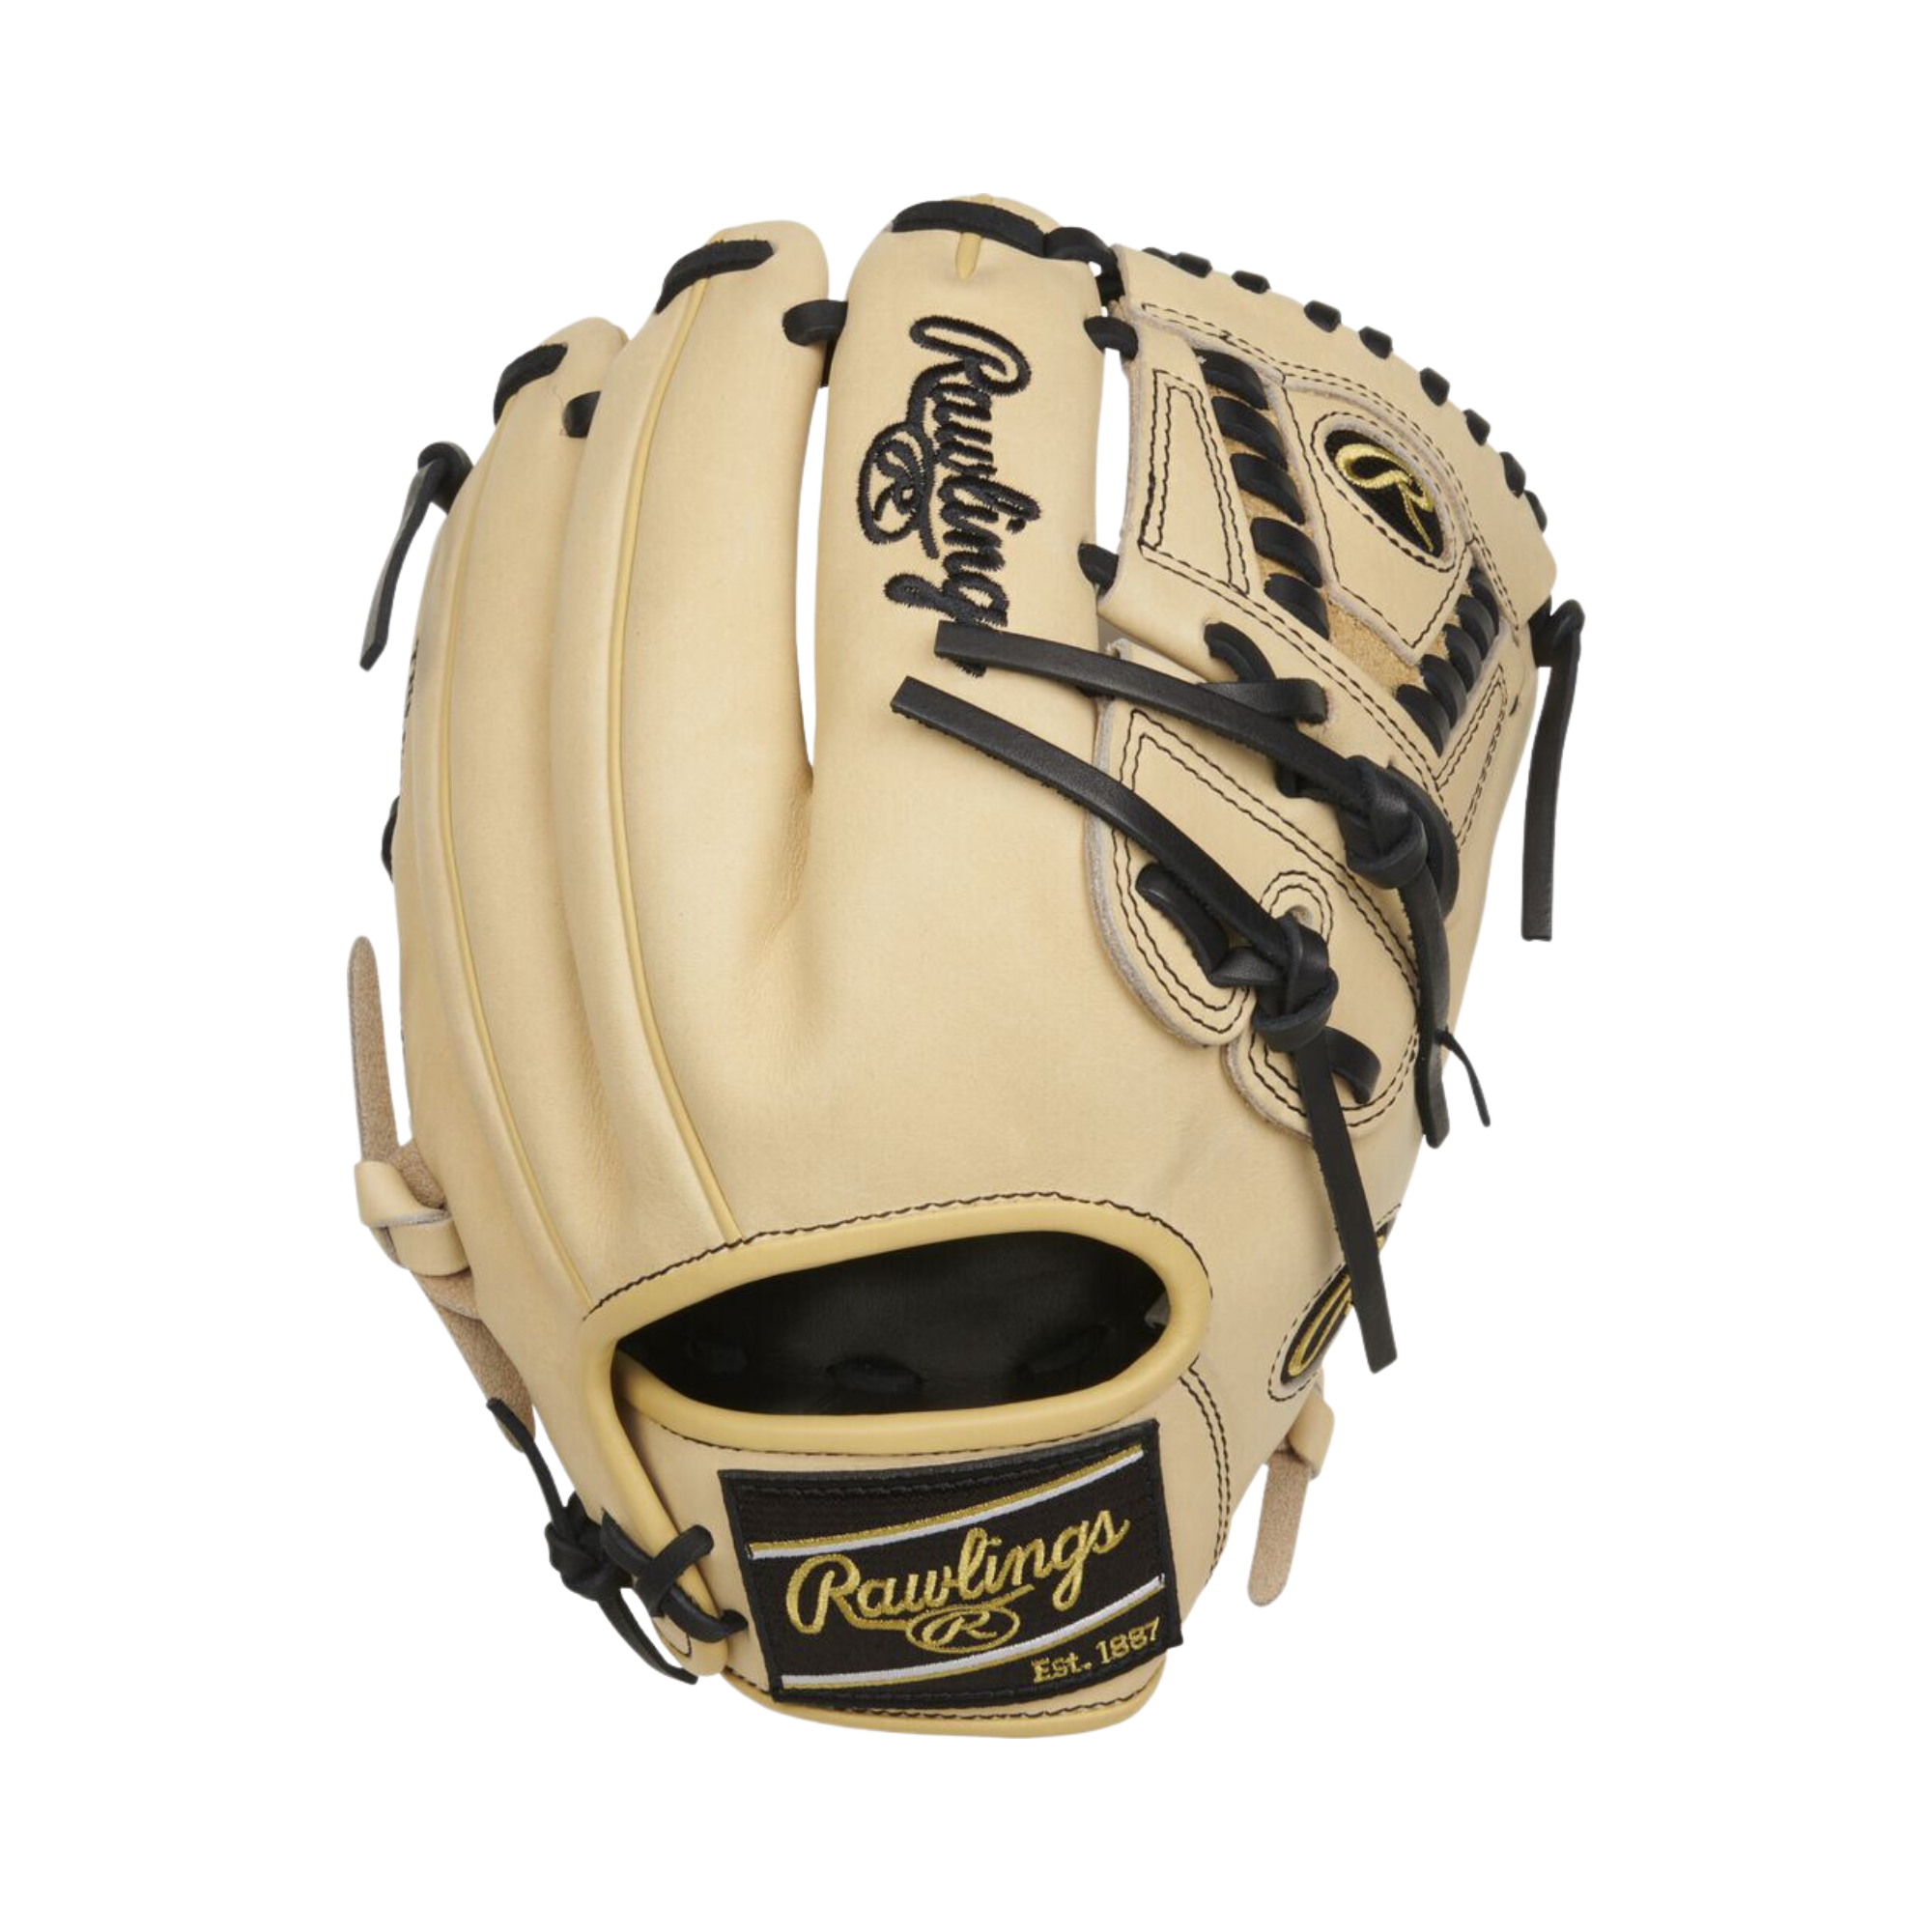 Rawlings Pro Label 7 Heart of the Hide Infield/Pitcher Glove